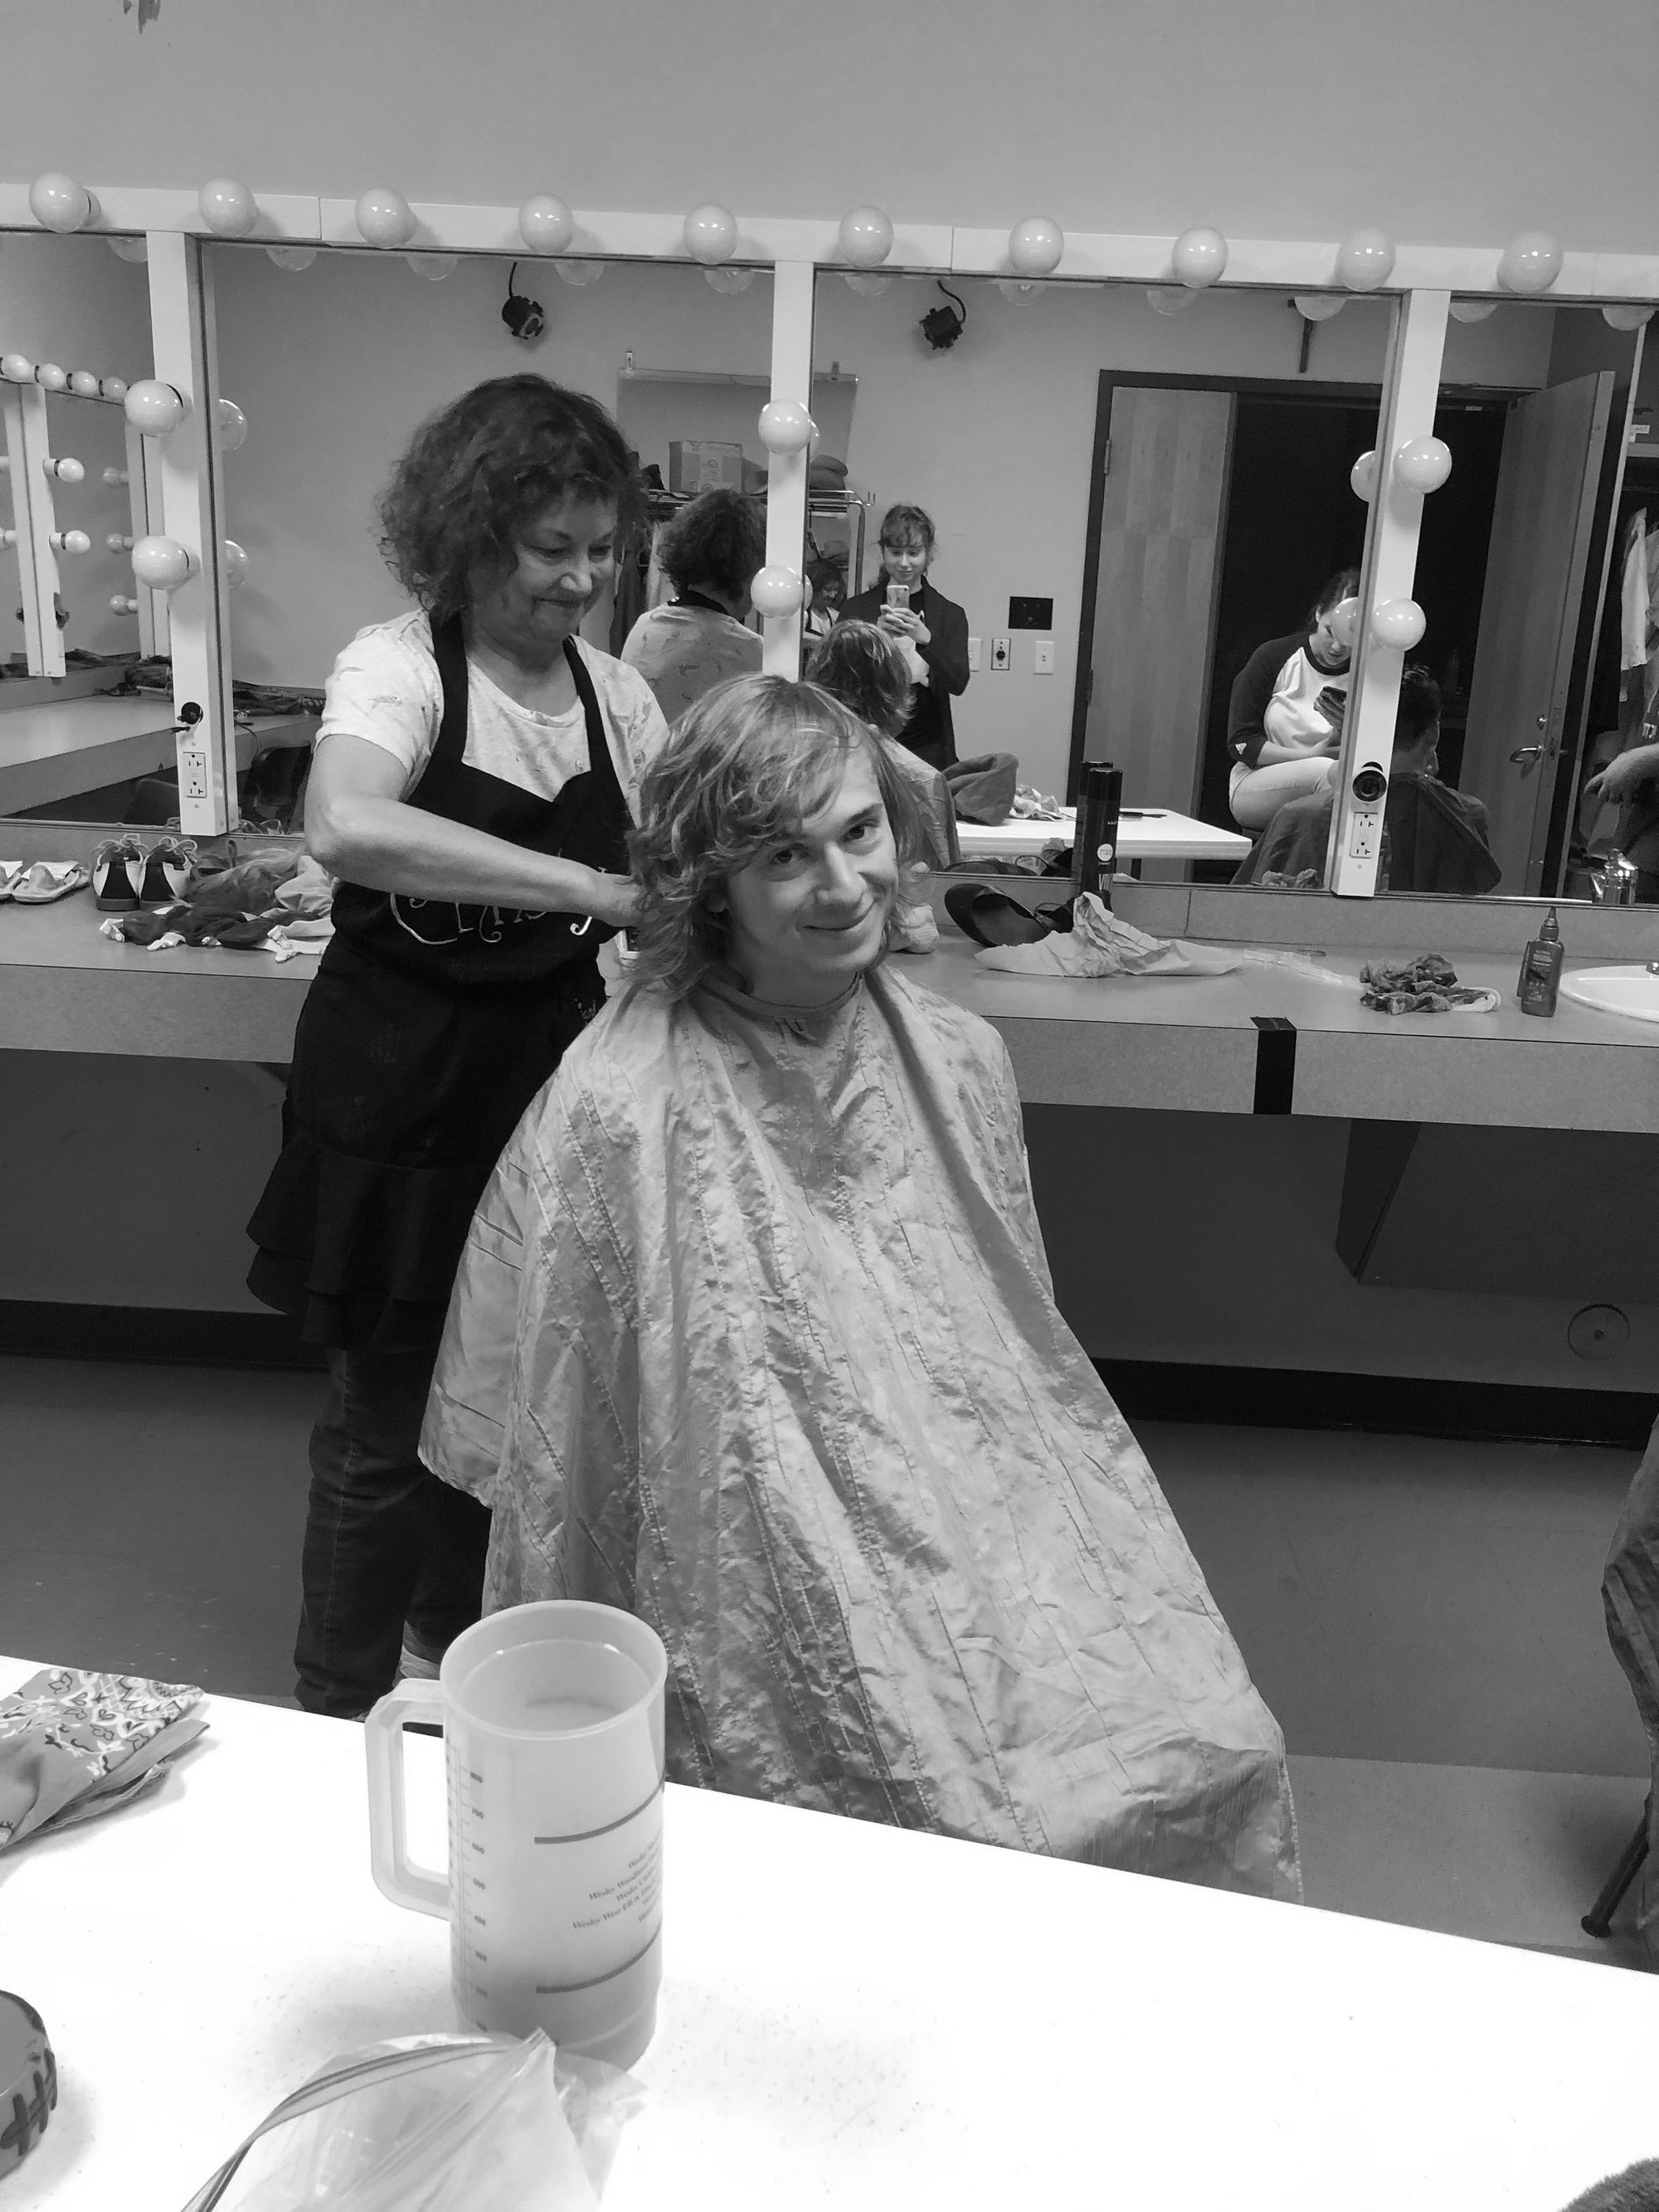 Theatre students agree to cut their hair for play